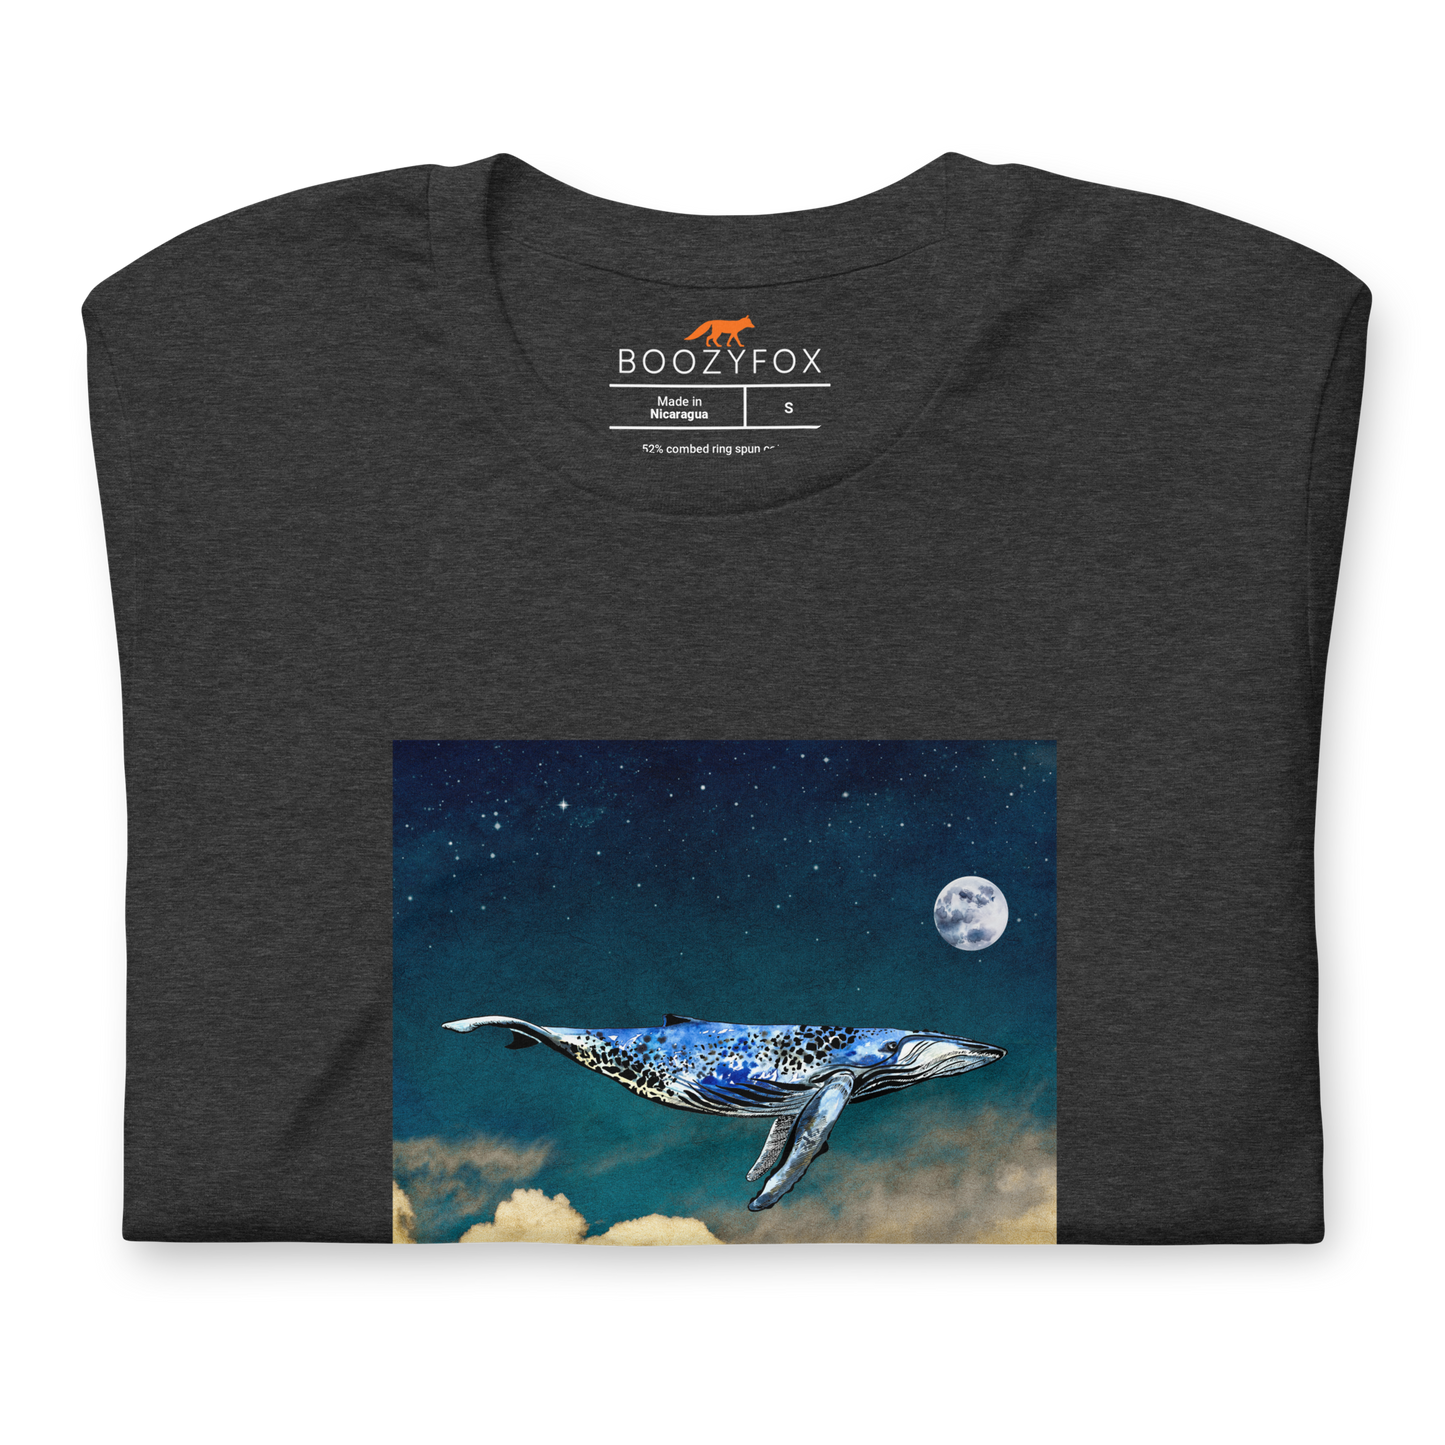 Front details of a Dark Grey Heather Premium Whale T-Shirt featuring a majestic Whale Under The Moon graphic on the chest - Cool Graphic Whale Tees - Boozy Fox